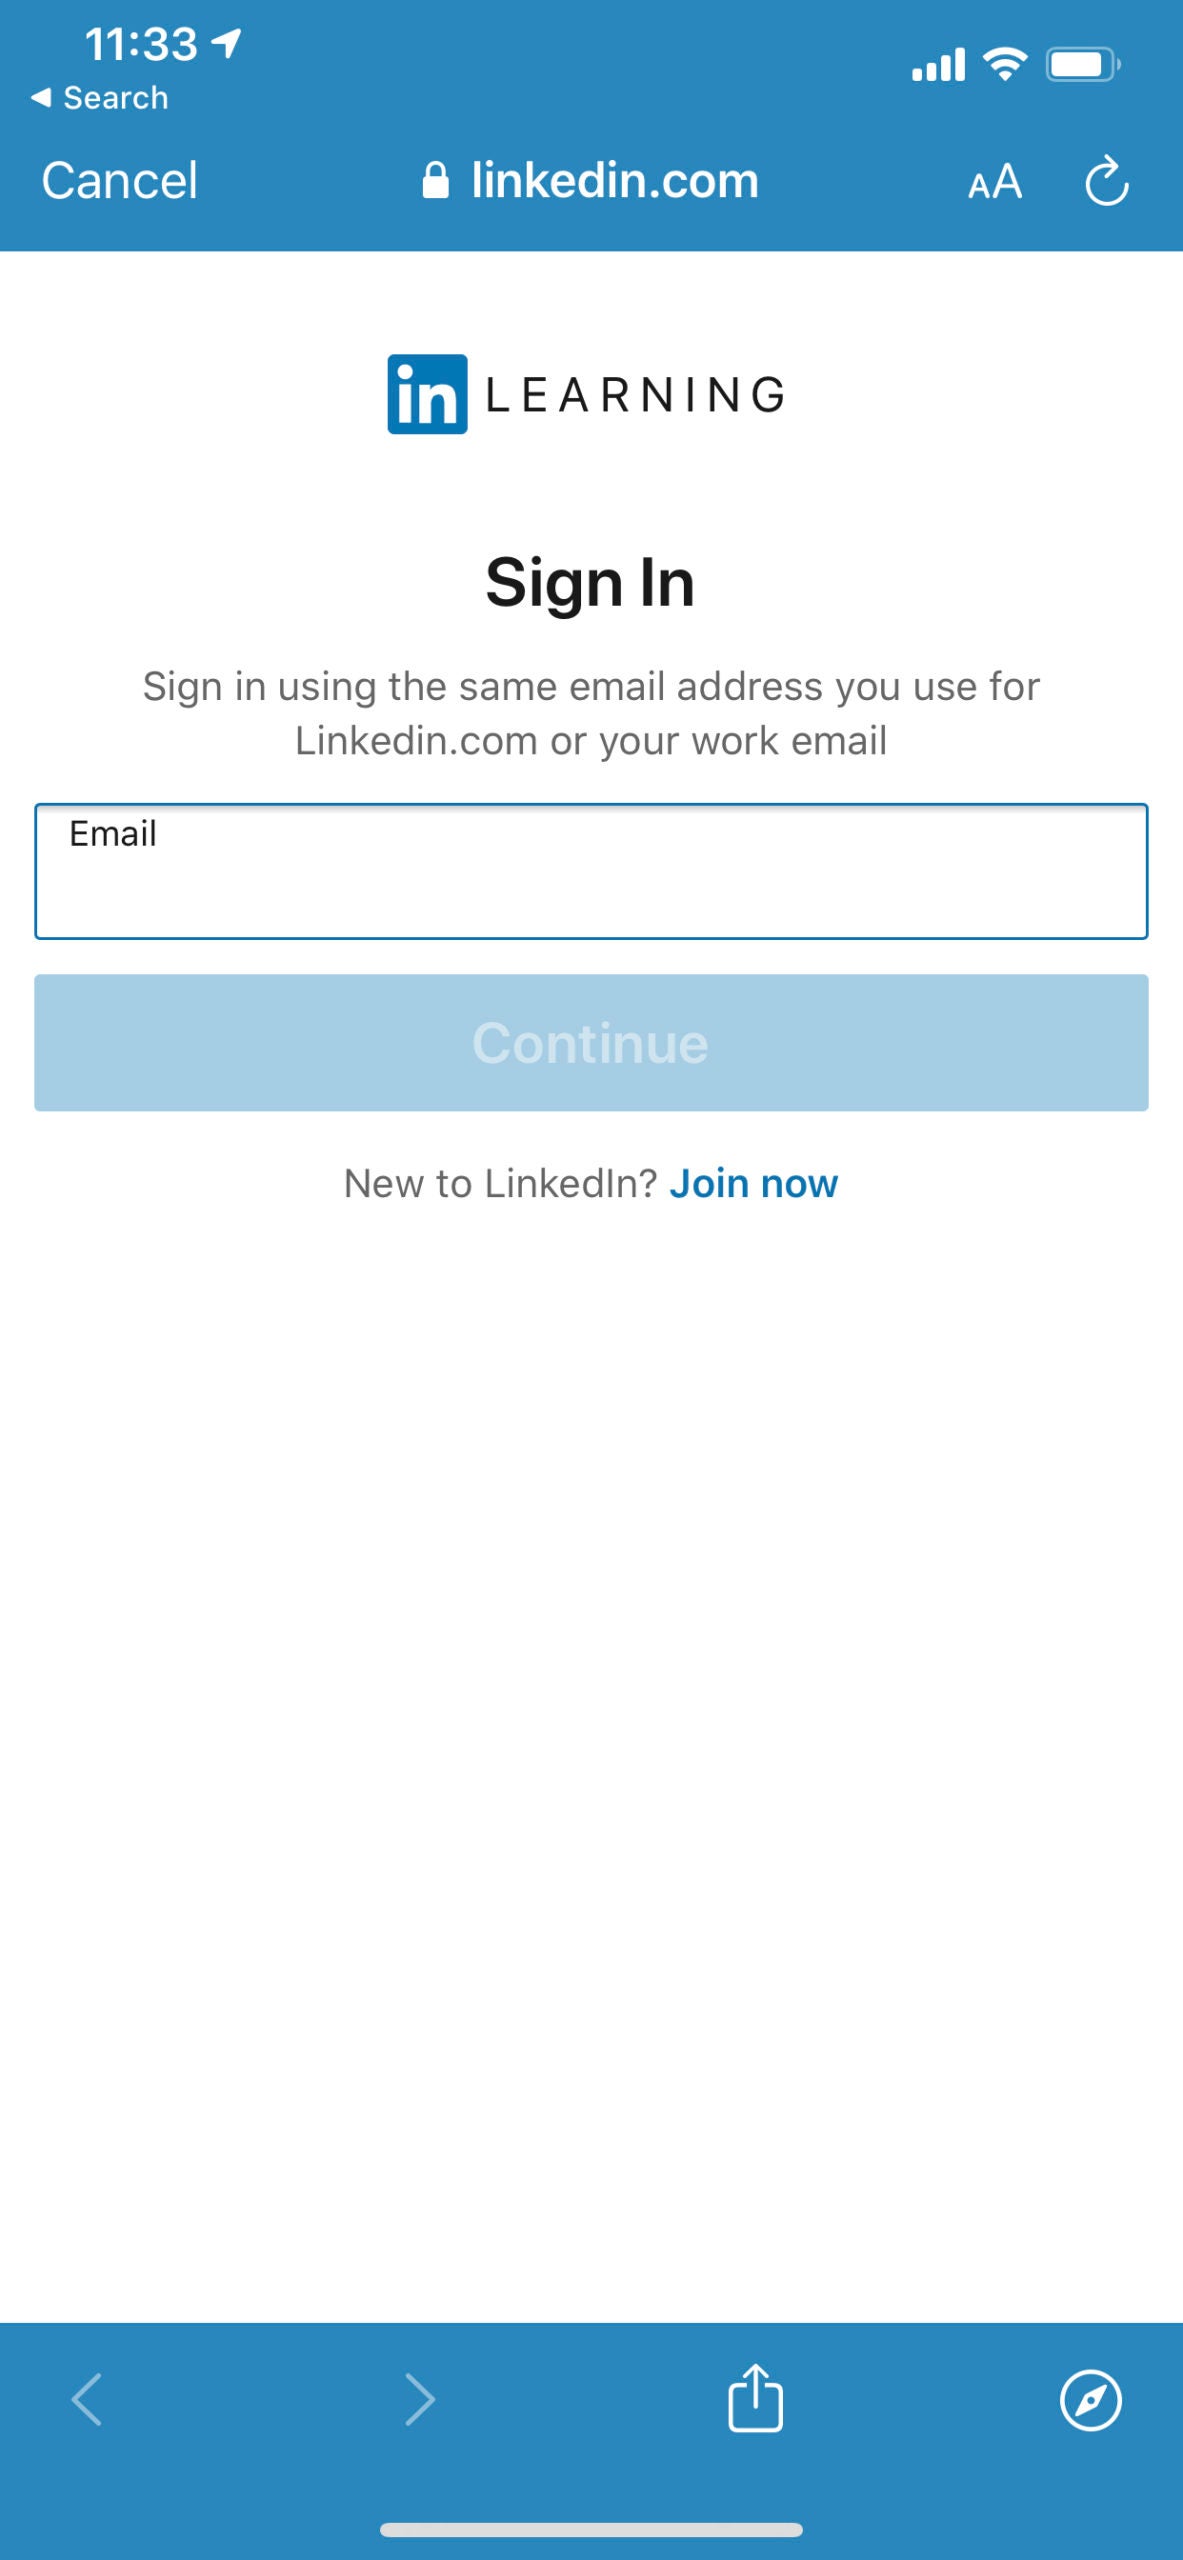 How to Log In to LinkedIn Learning